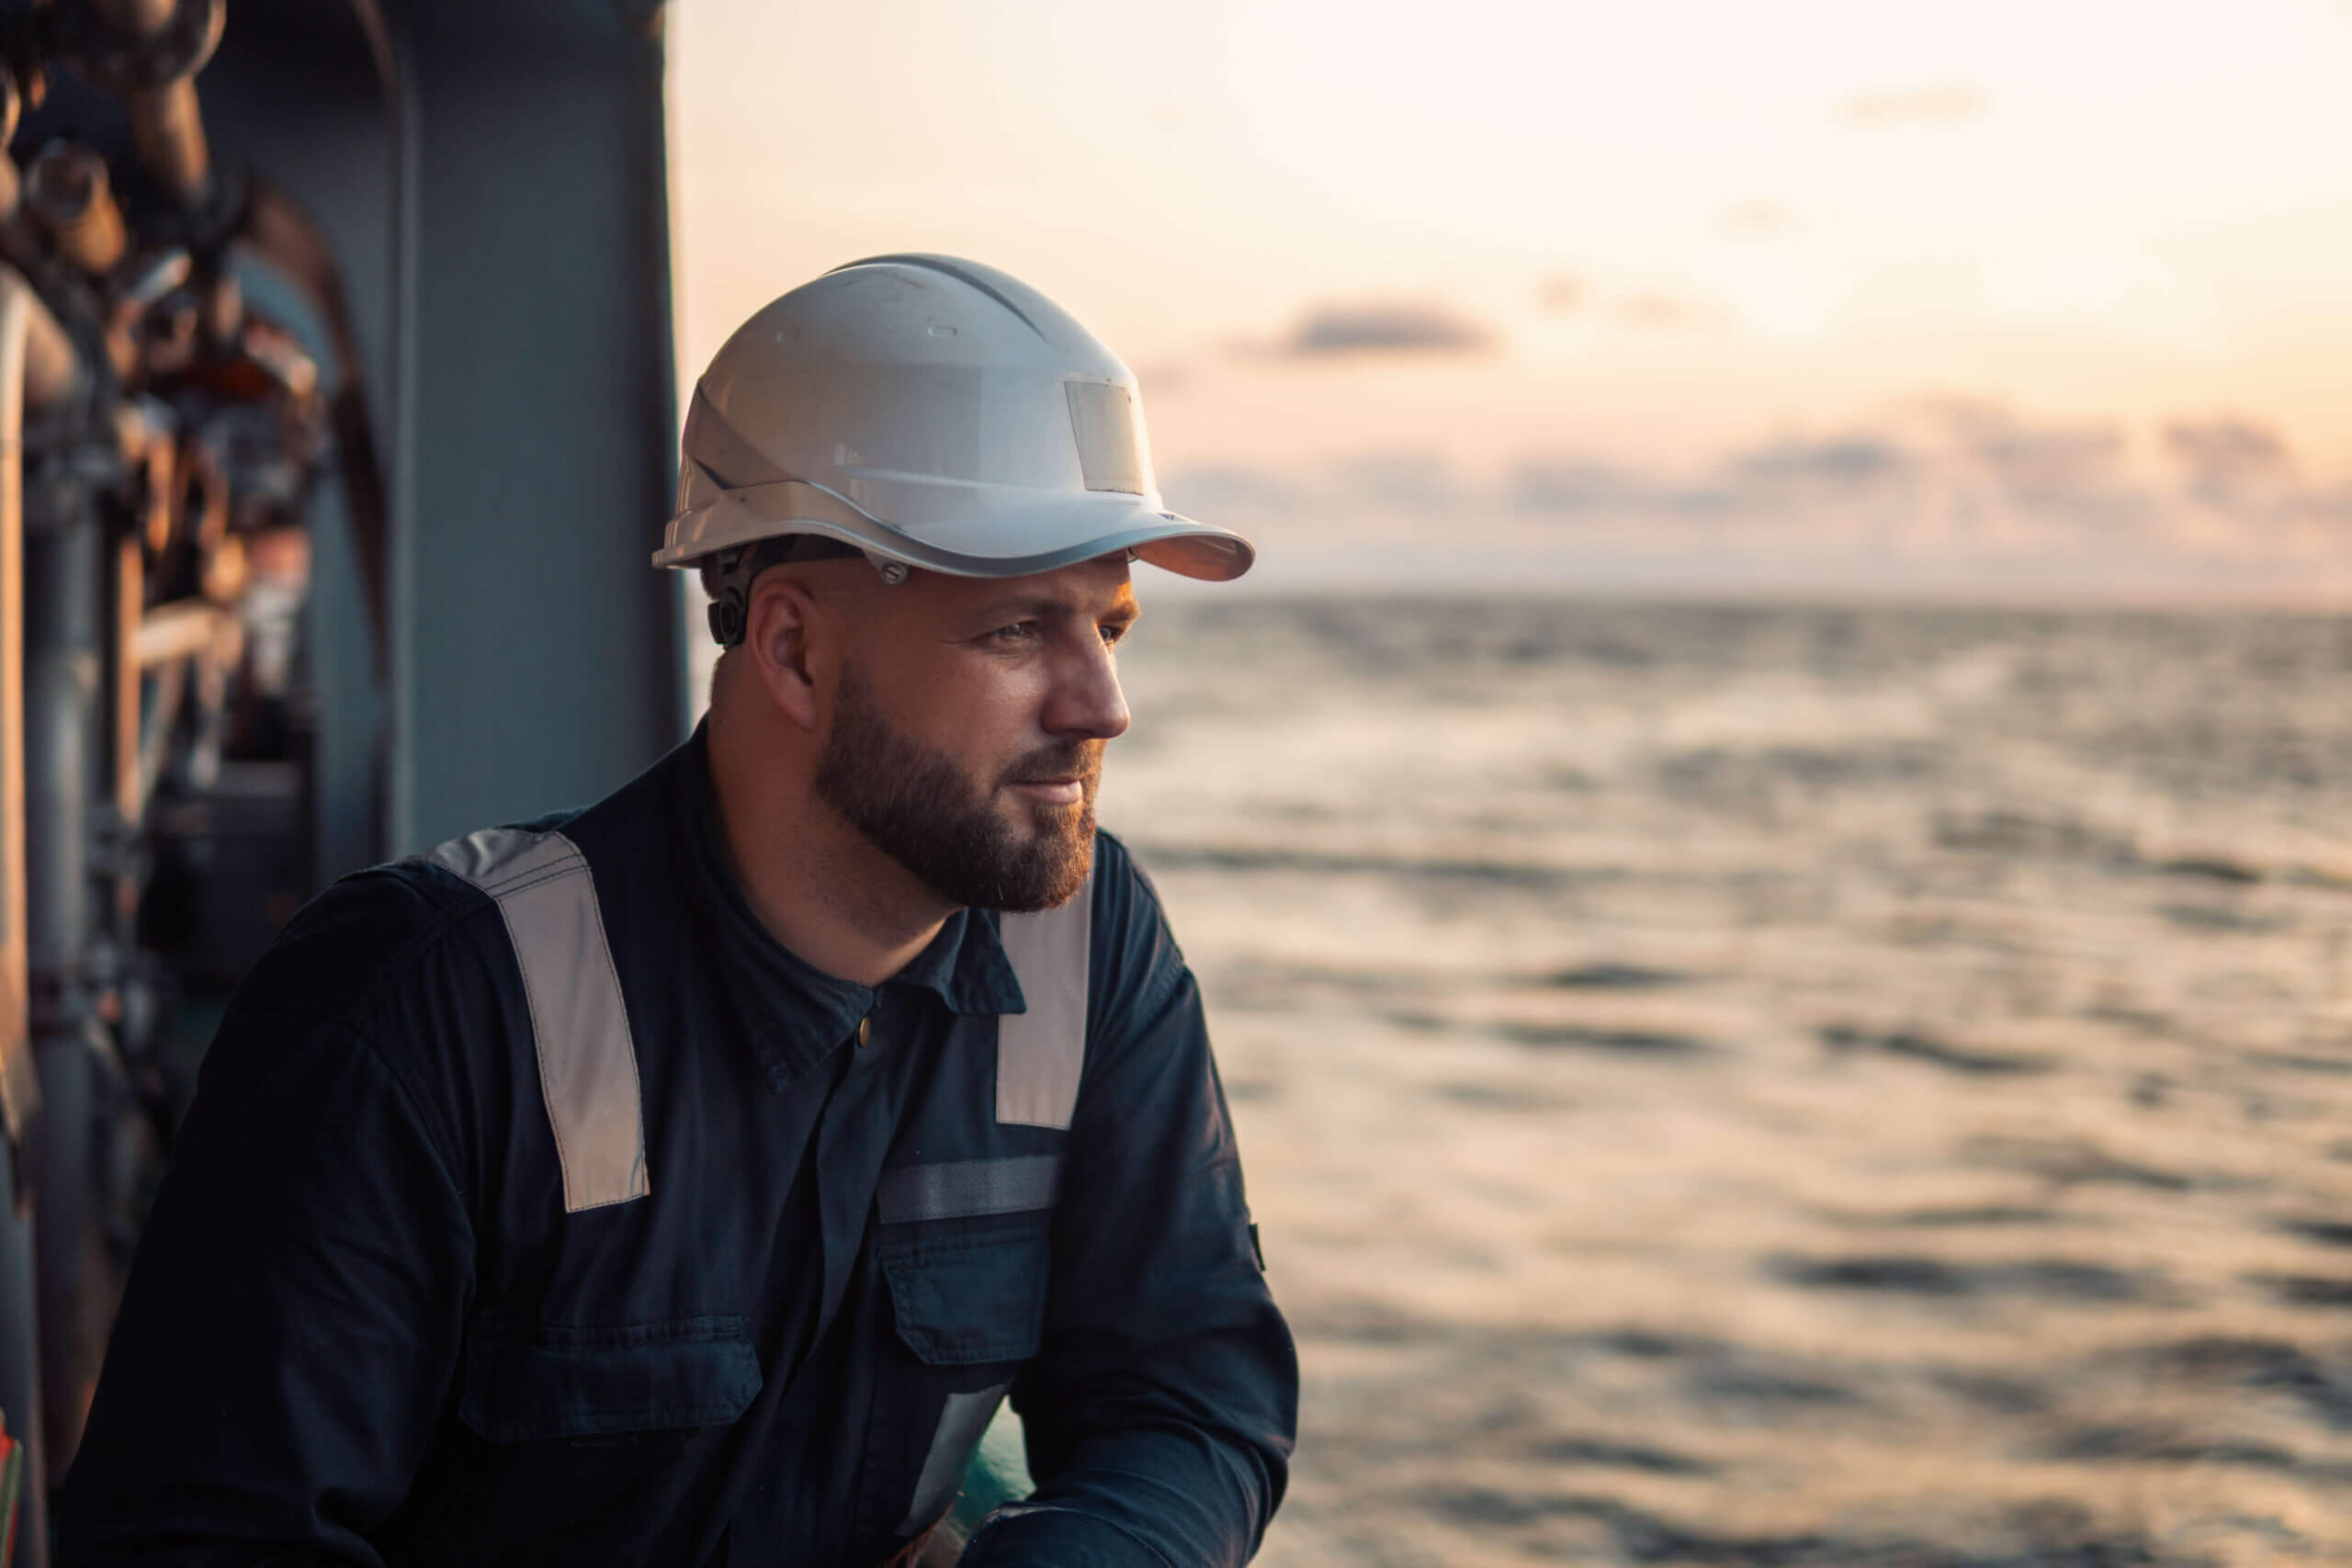 An offshore worker gazing at the sea during sunset